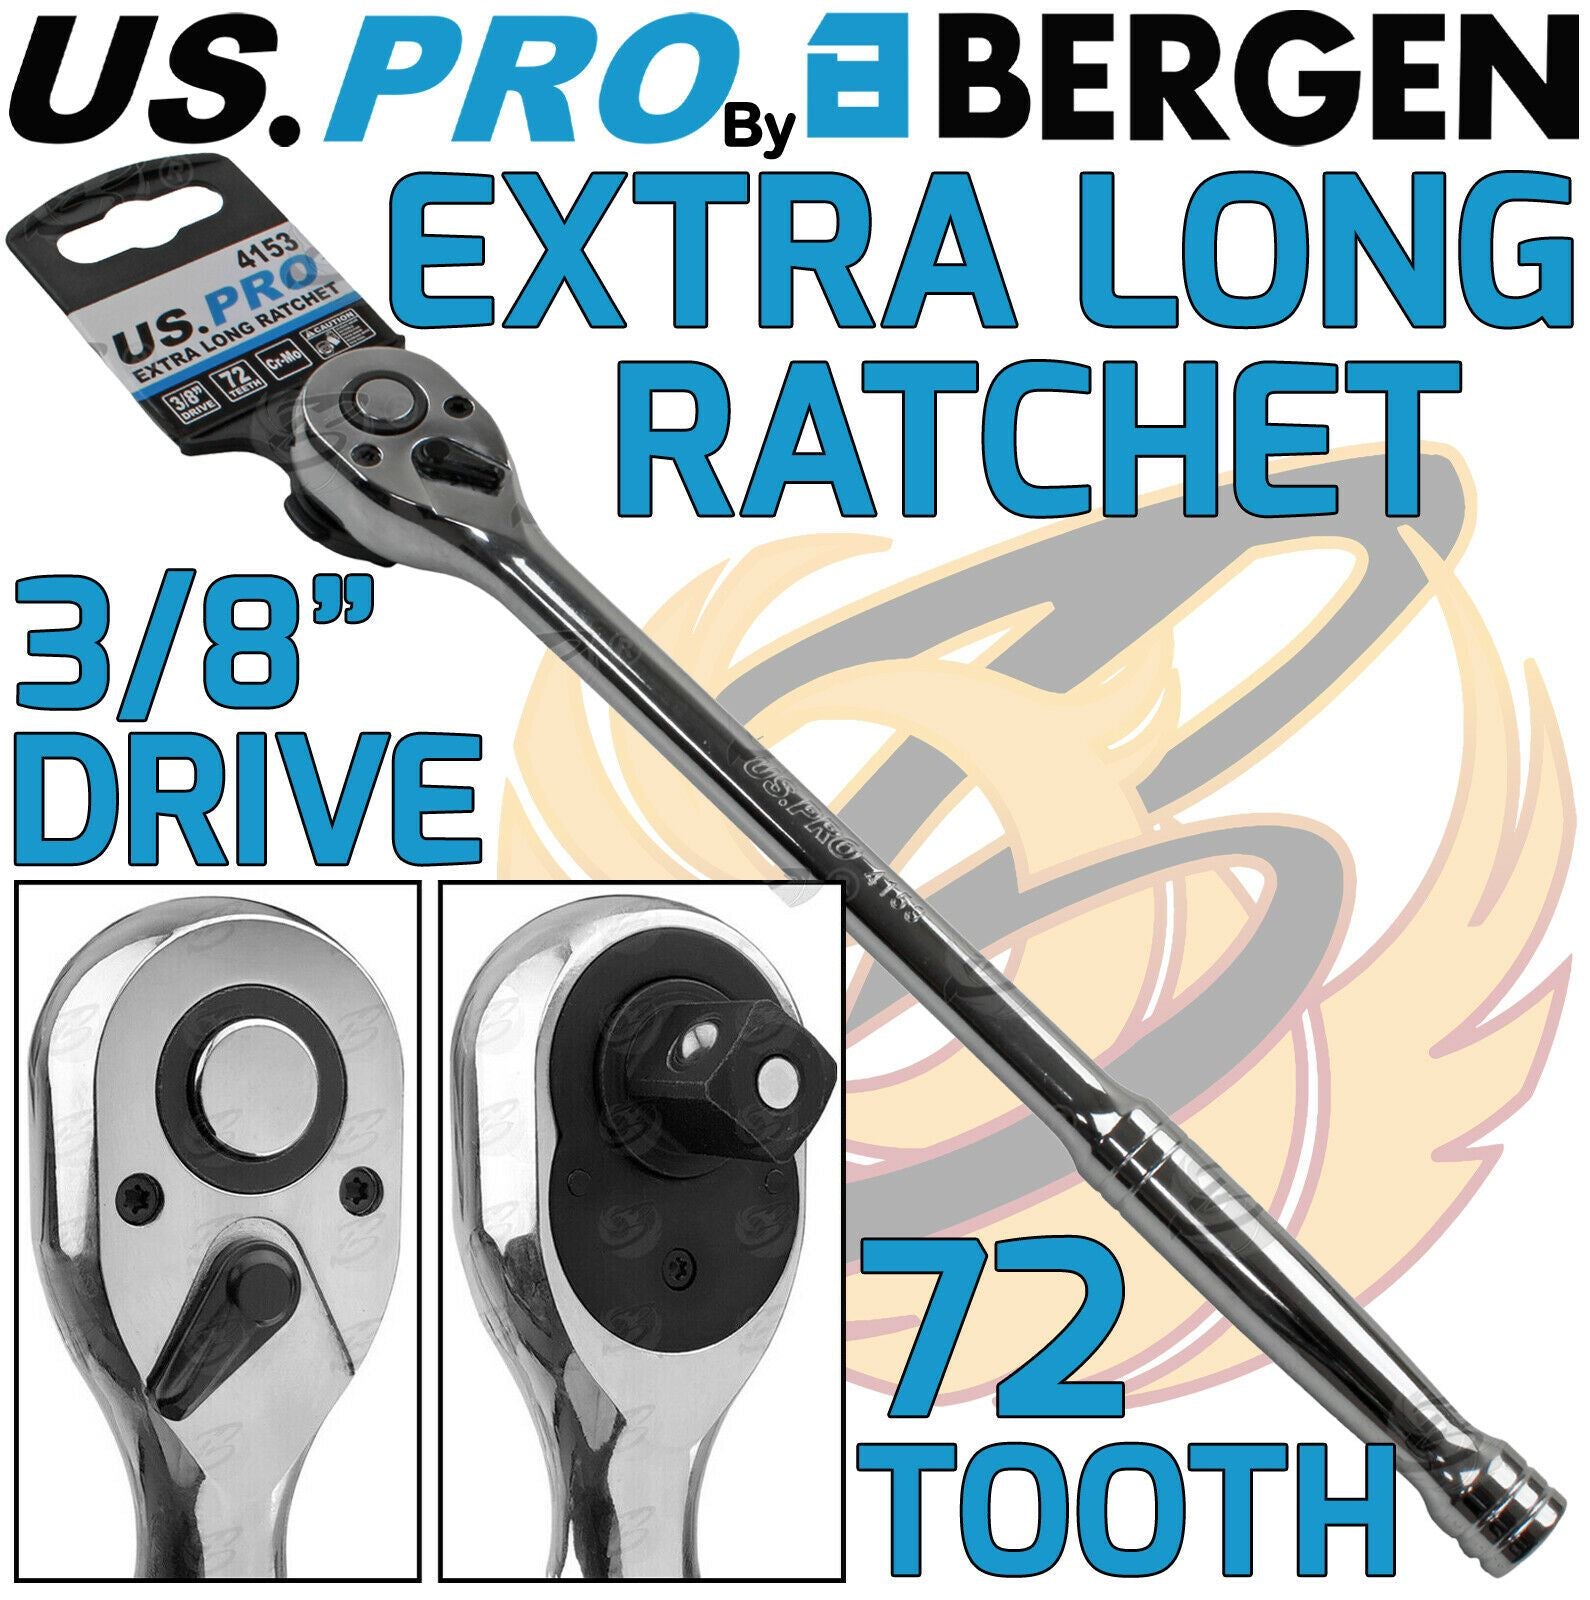 US PRO 3/8" DRIVE 72 TOOTH EXTRA LONG RATCHET HANDLE